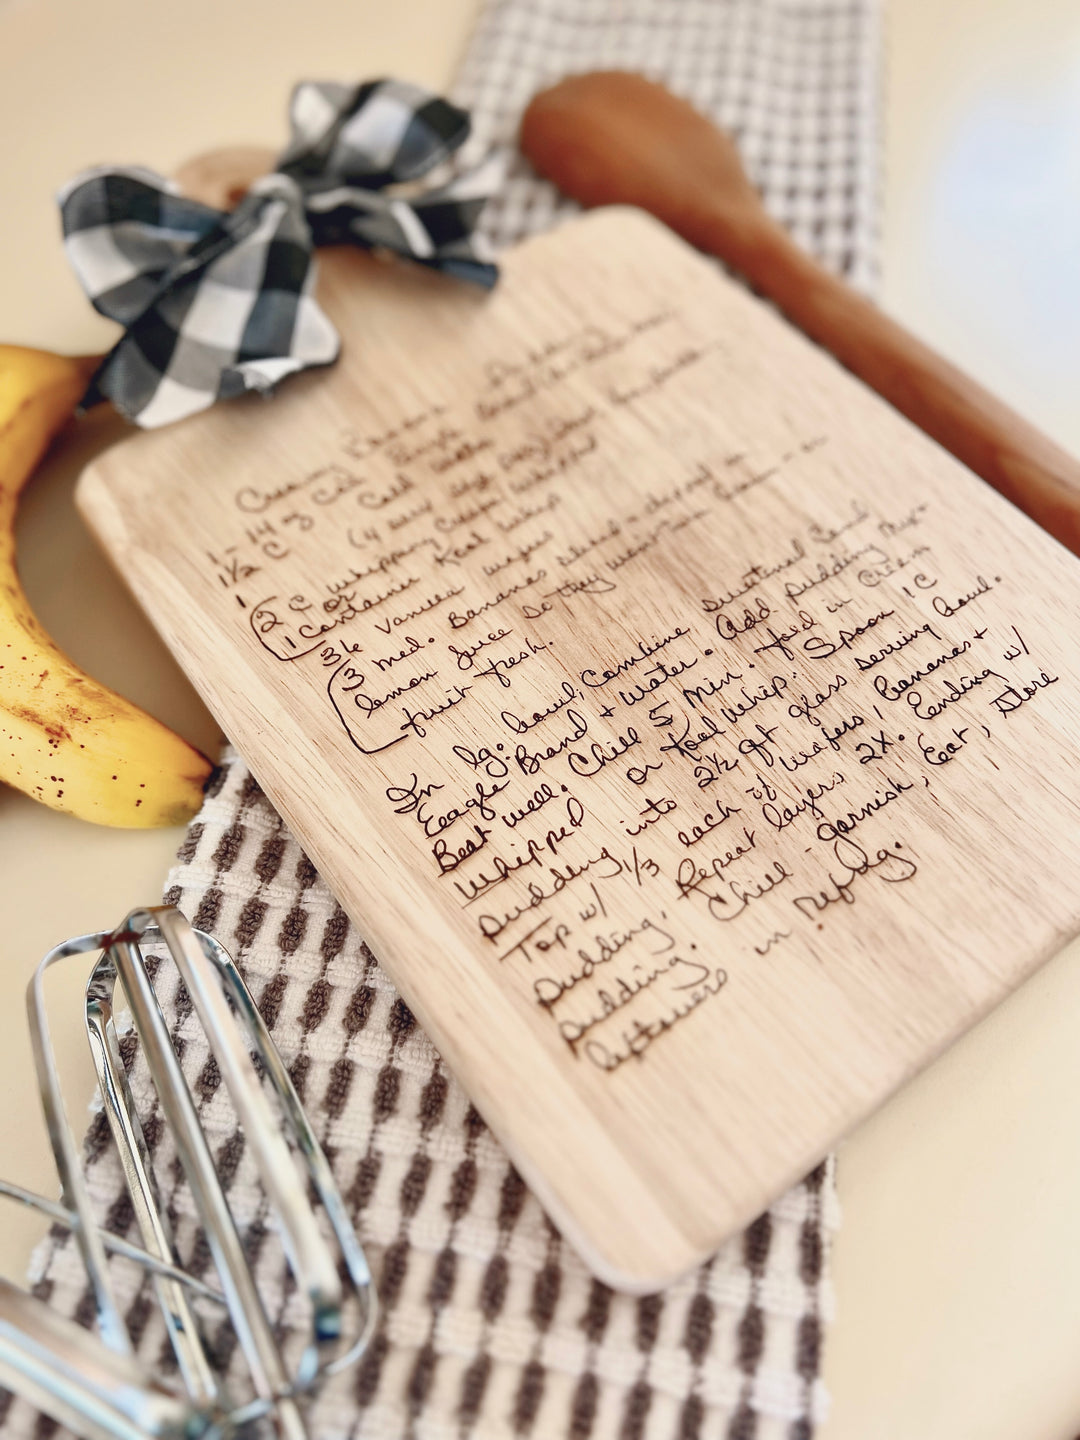 Personalized, Engraved Recipe Board - Natural Wood